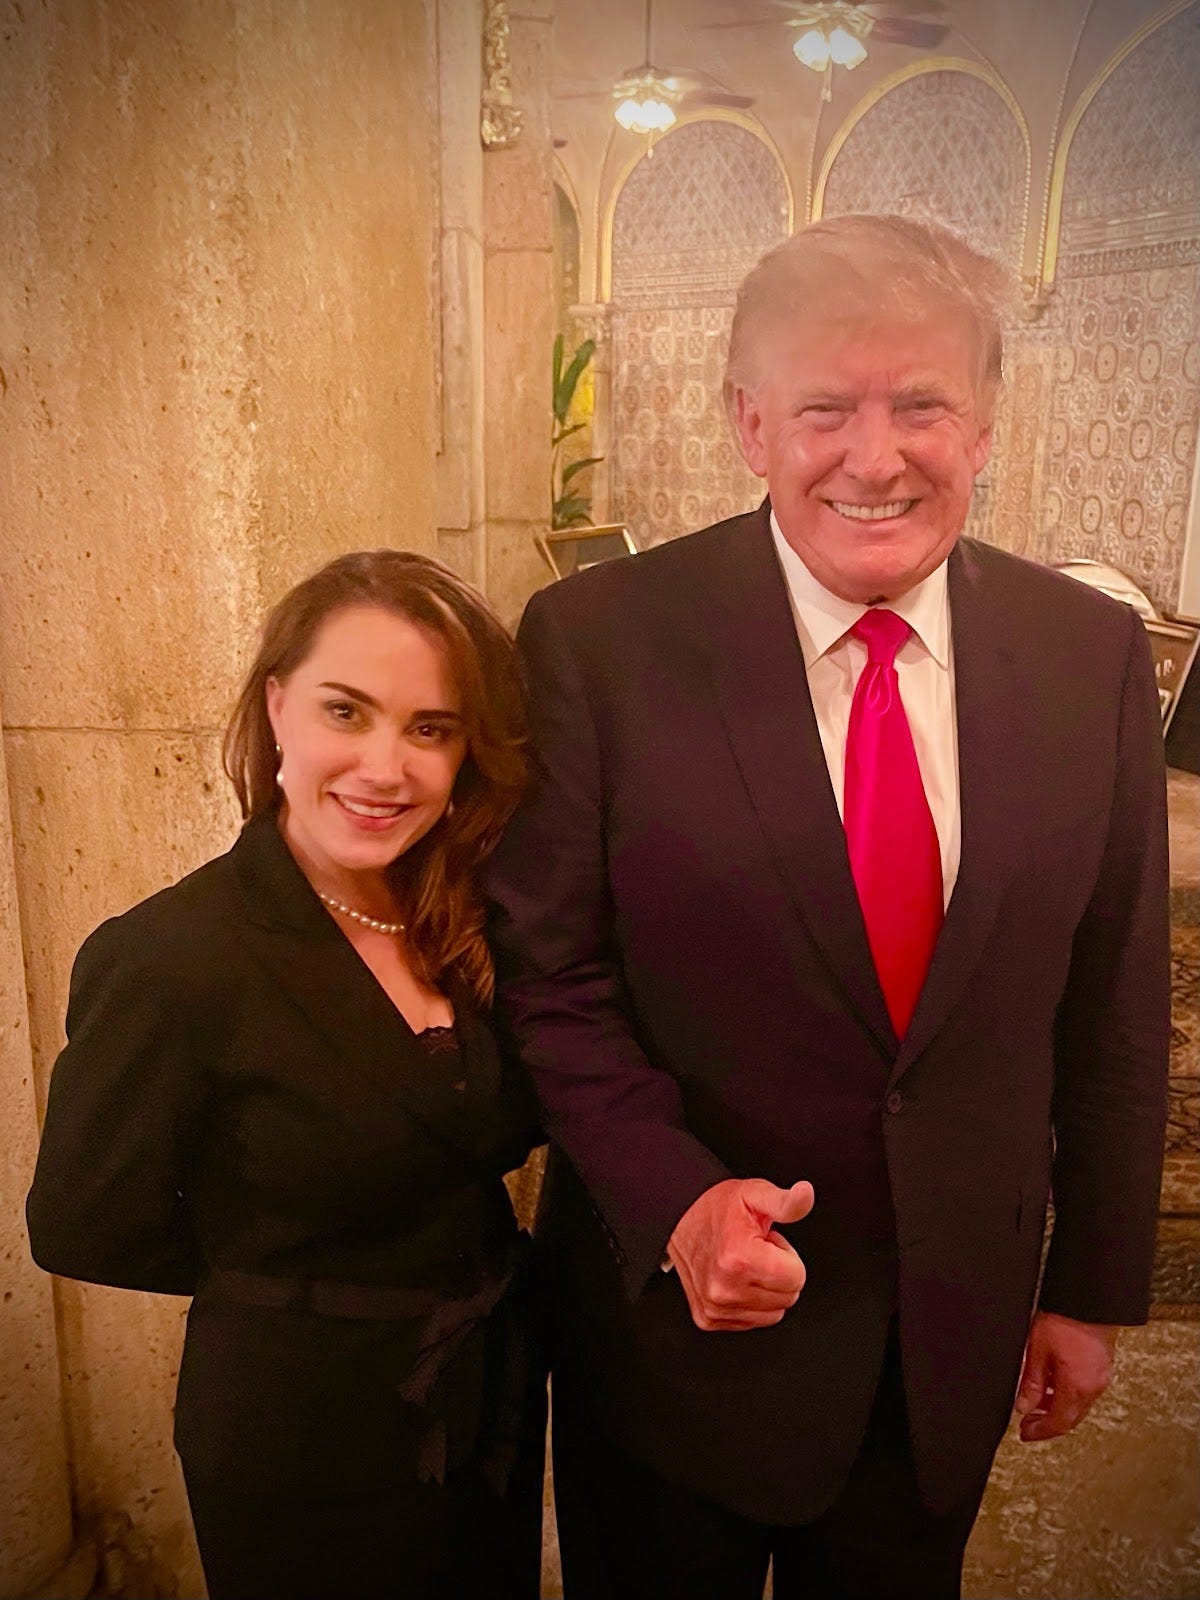 Deborah Adeimy, who is running for Congress in Florida, poses with former President Donald Trump at Mar-a-Lago.